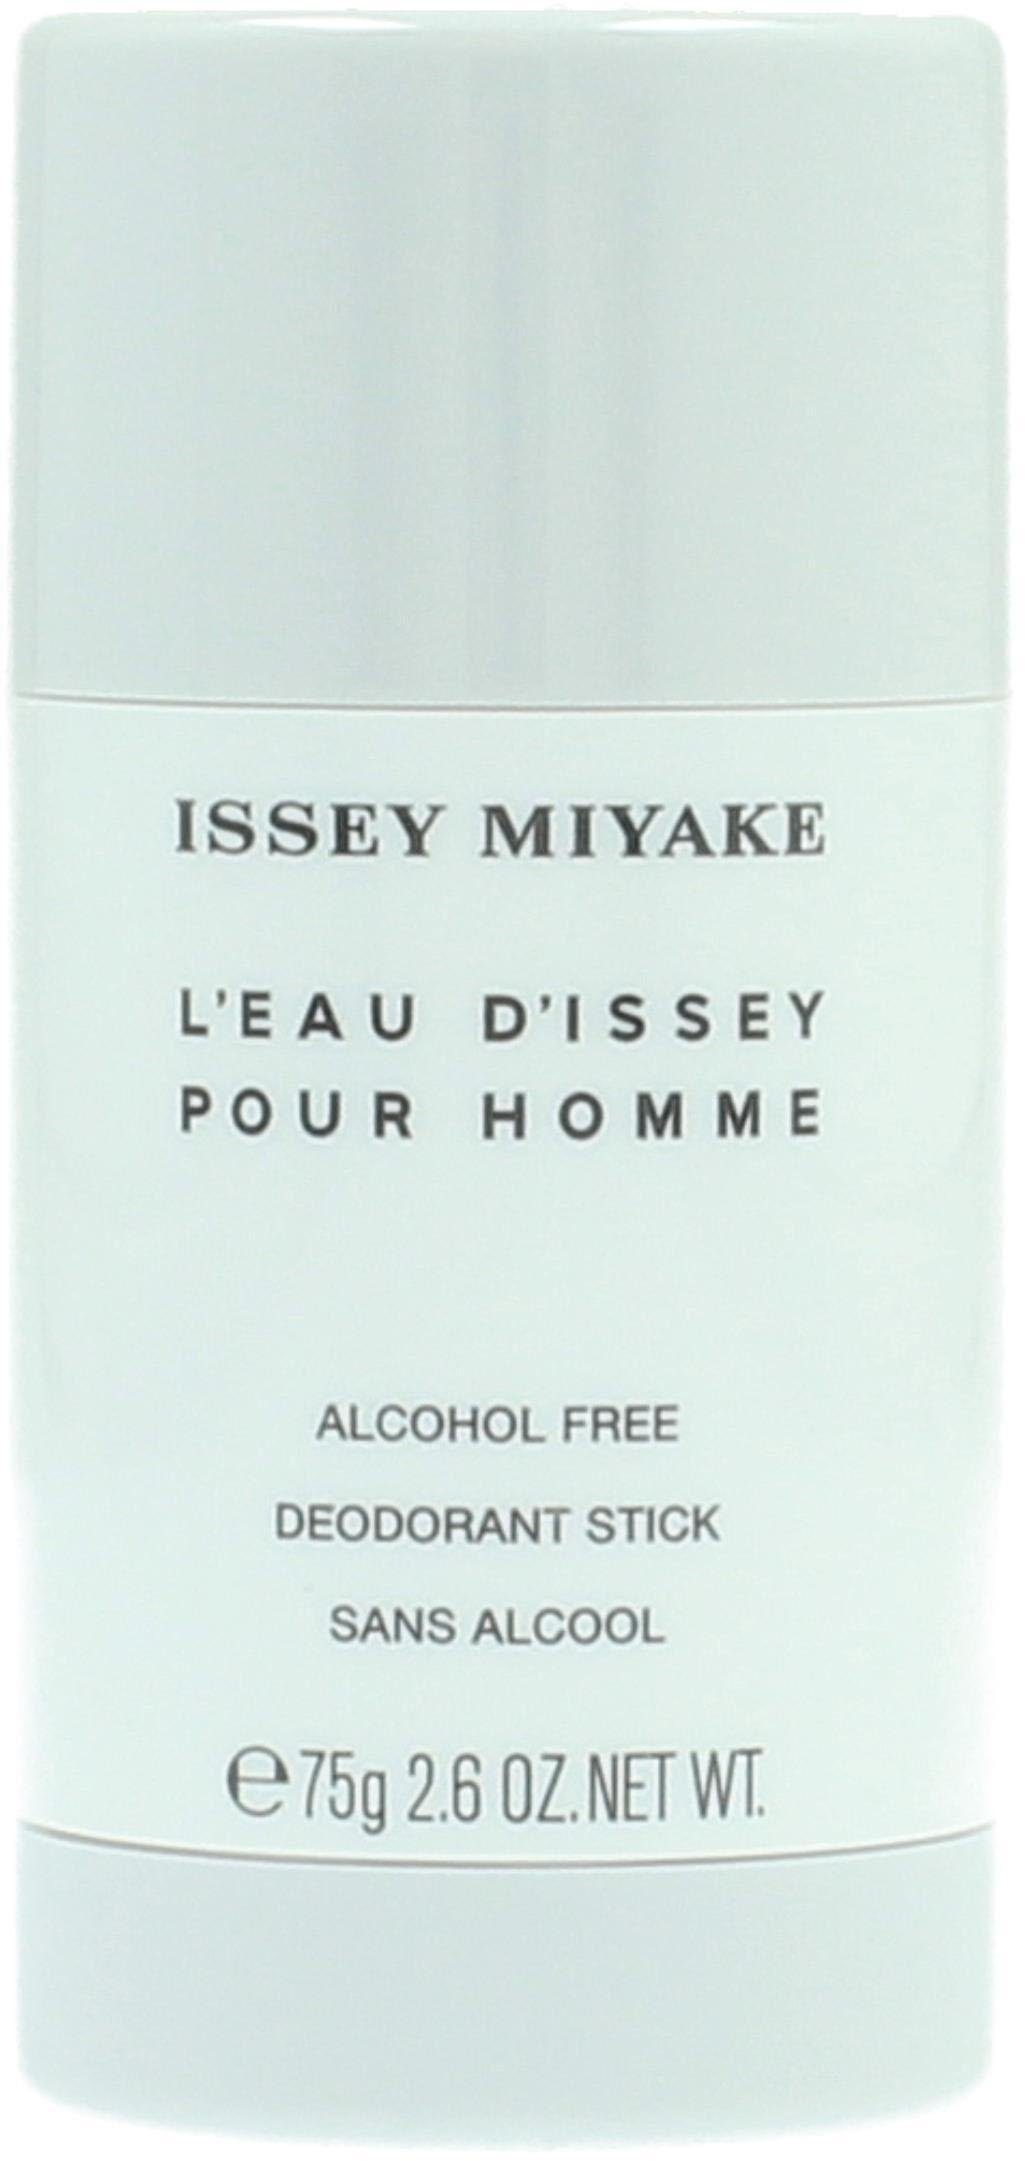 L'Eau Issey Miyake Homme Pour Deo-Stift D'Issey